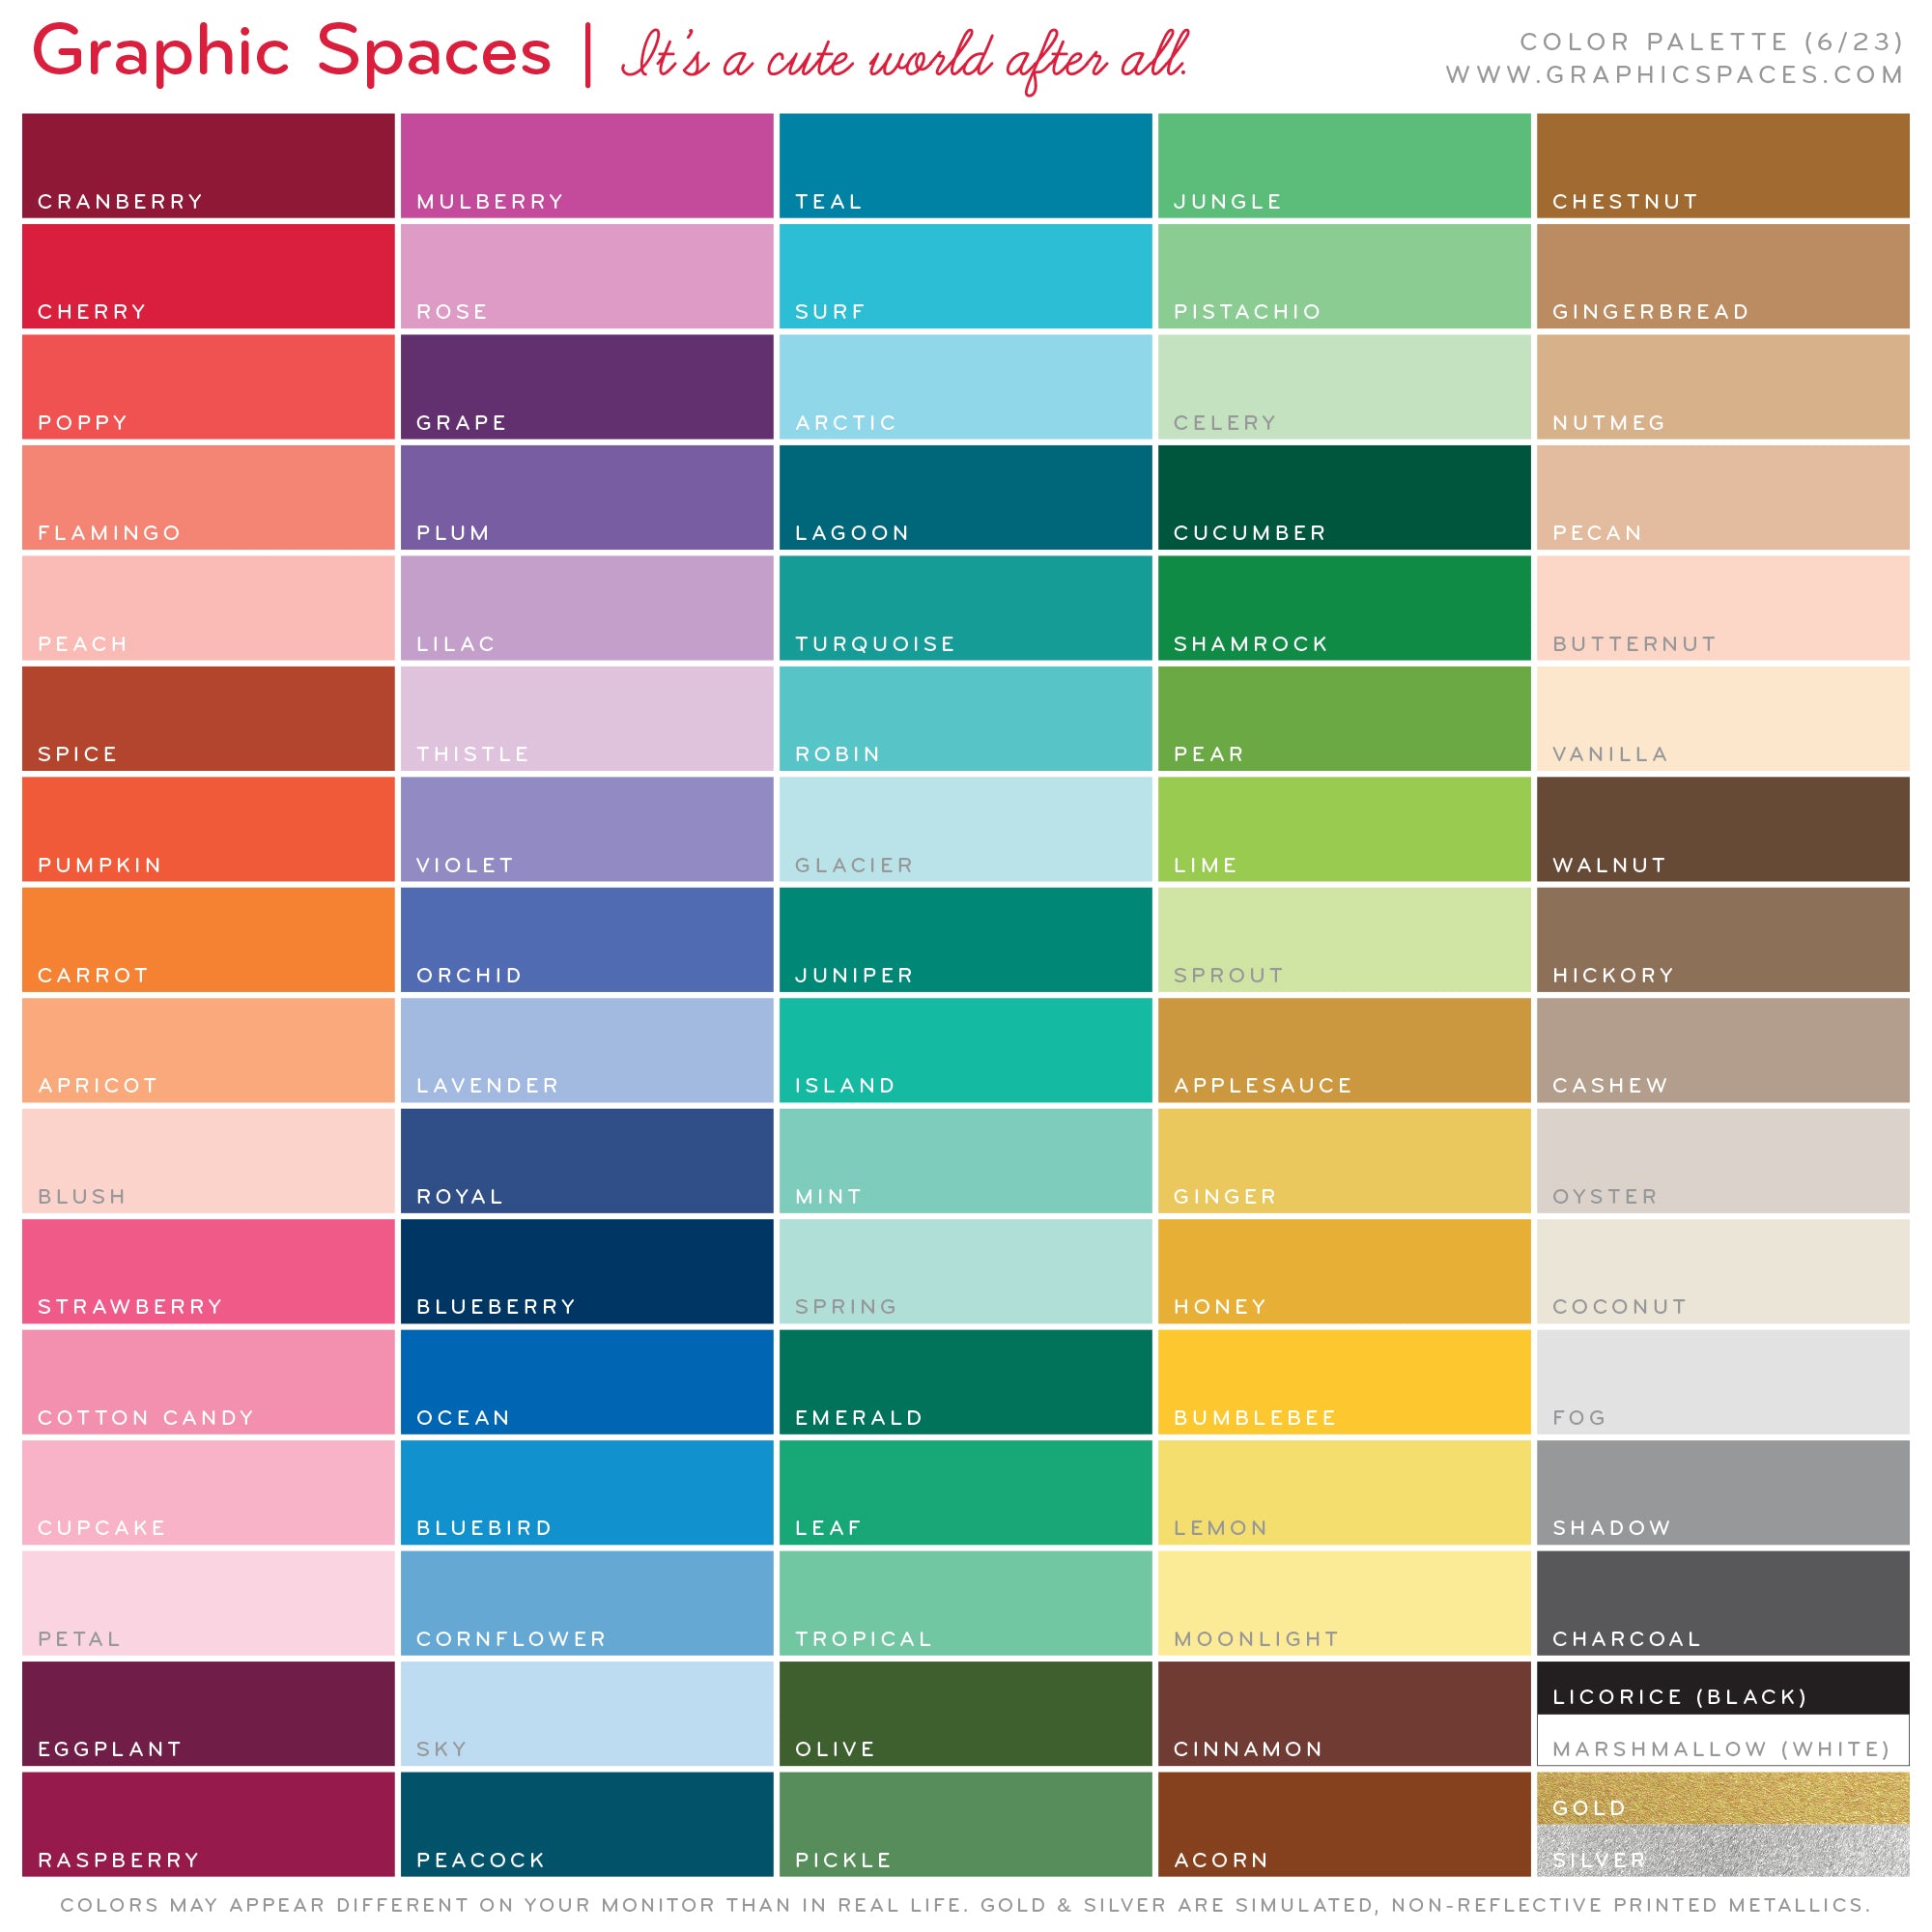 Choosing the Right Color Palette for Artistic Wall Graphics